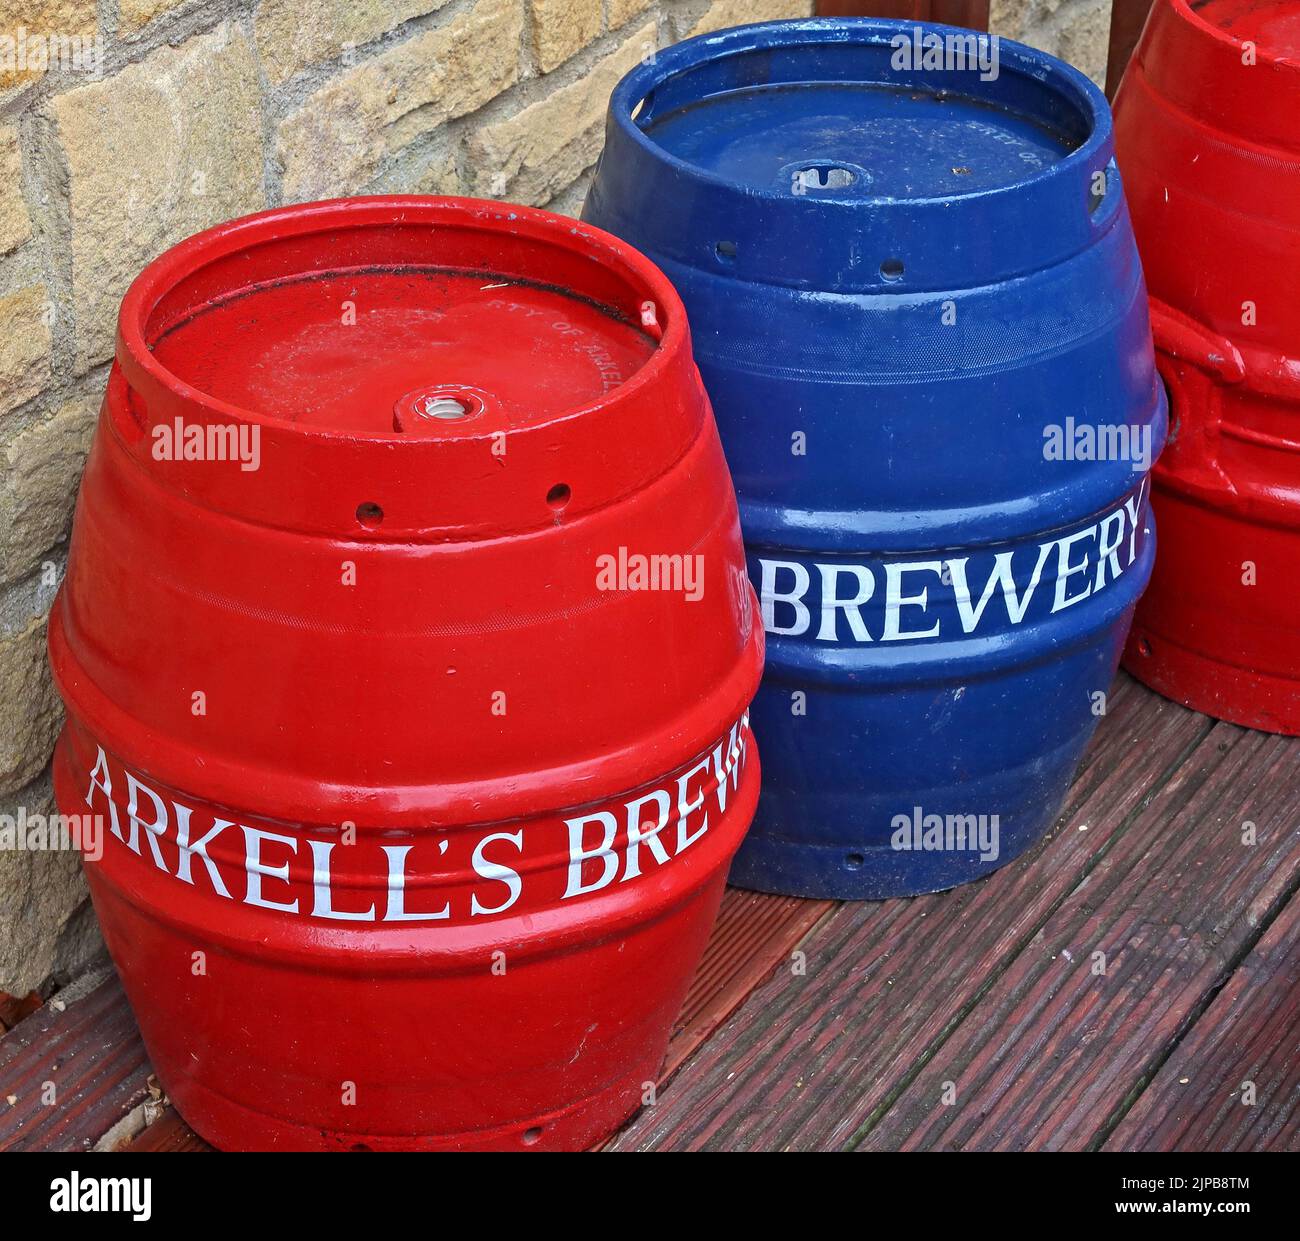 Arkells Brewery, fûts rouges et bleus, Chipping Norton, Oxfordshire, Angleterre, Royaume-Uni, OX7 5AA Banque D'Images